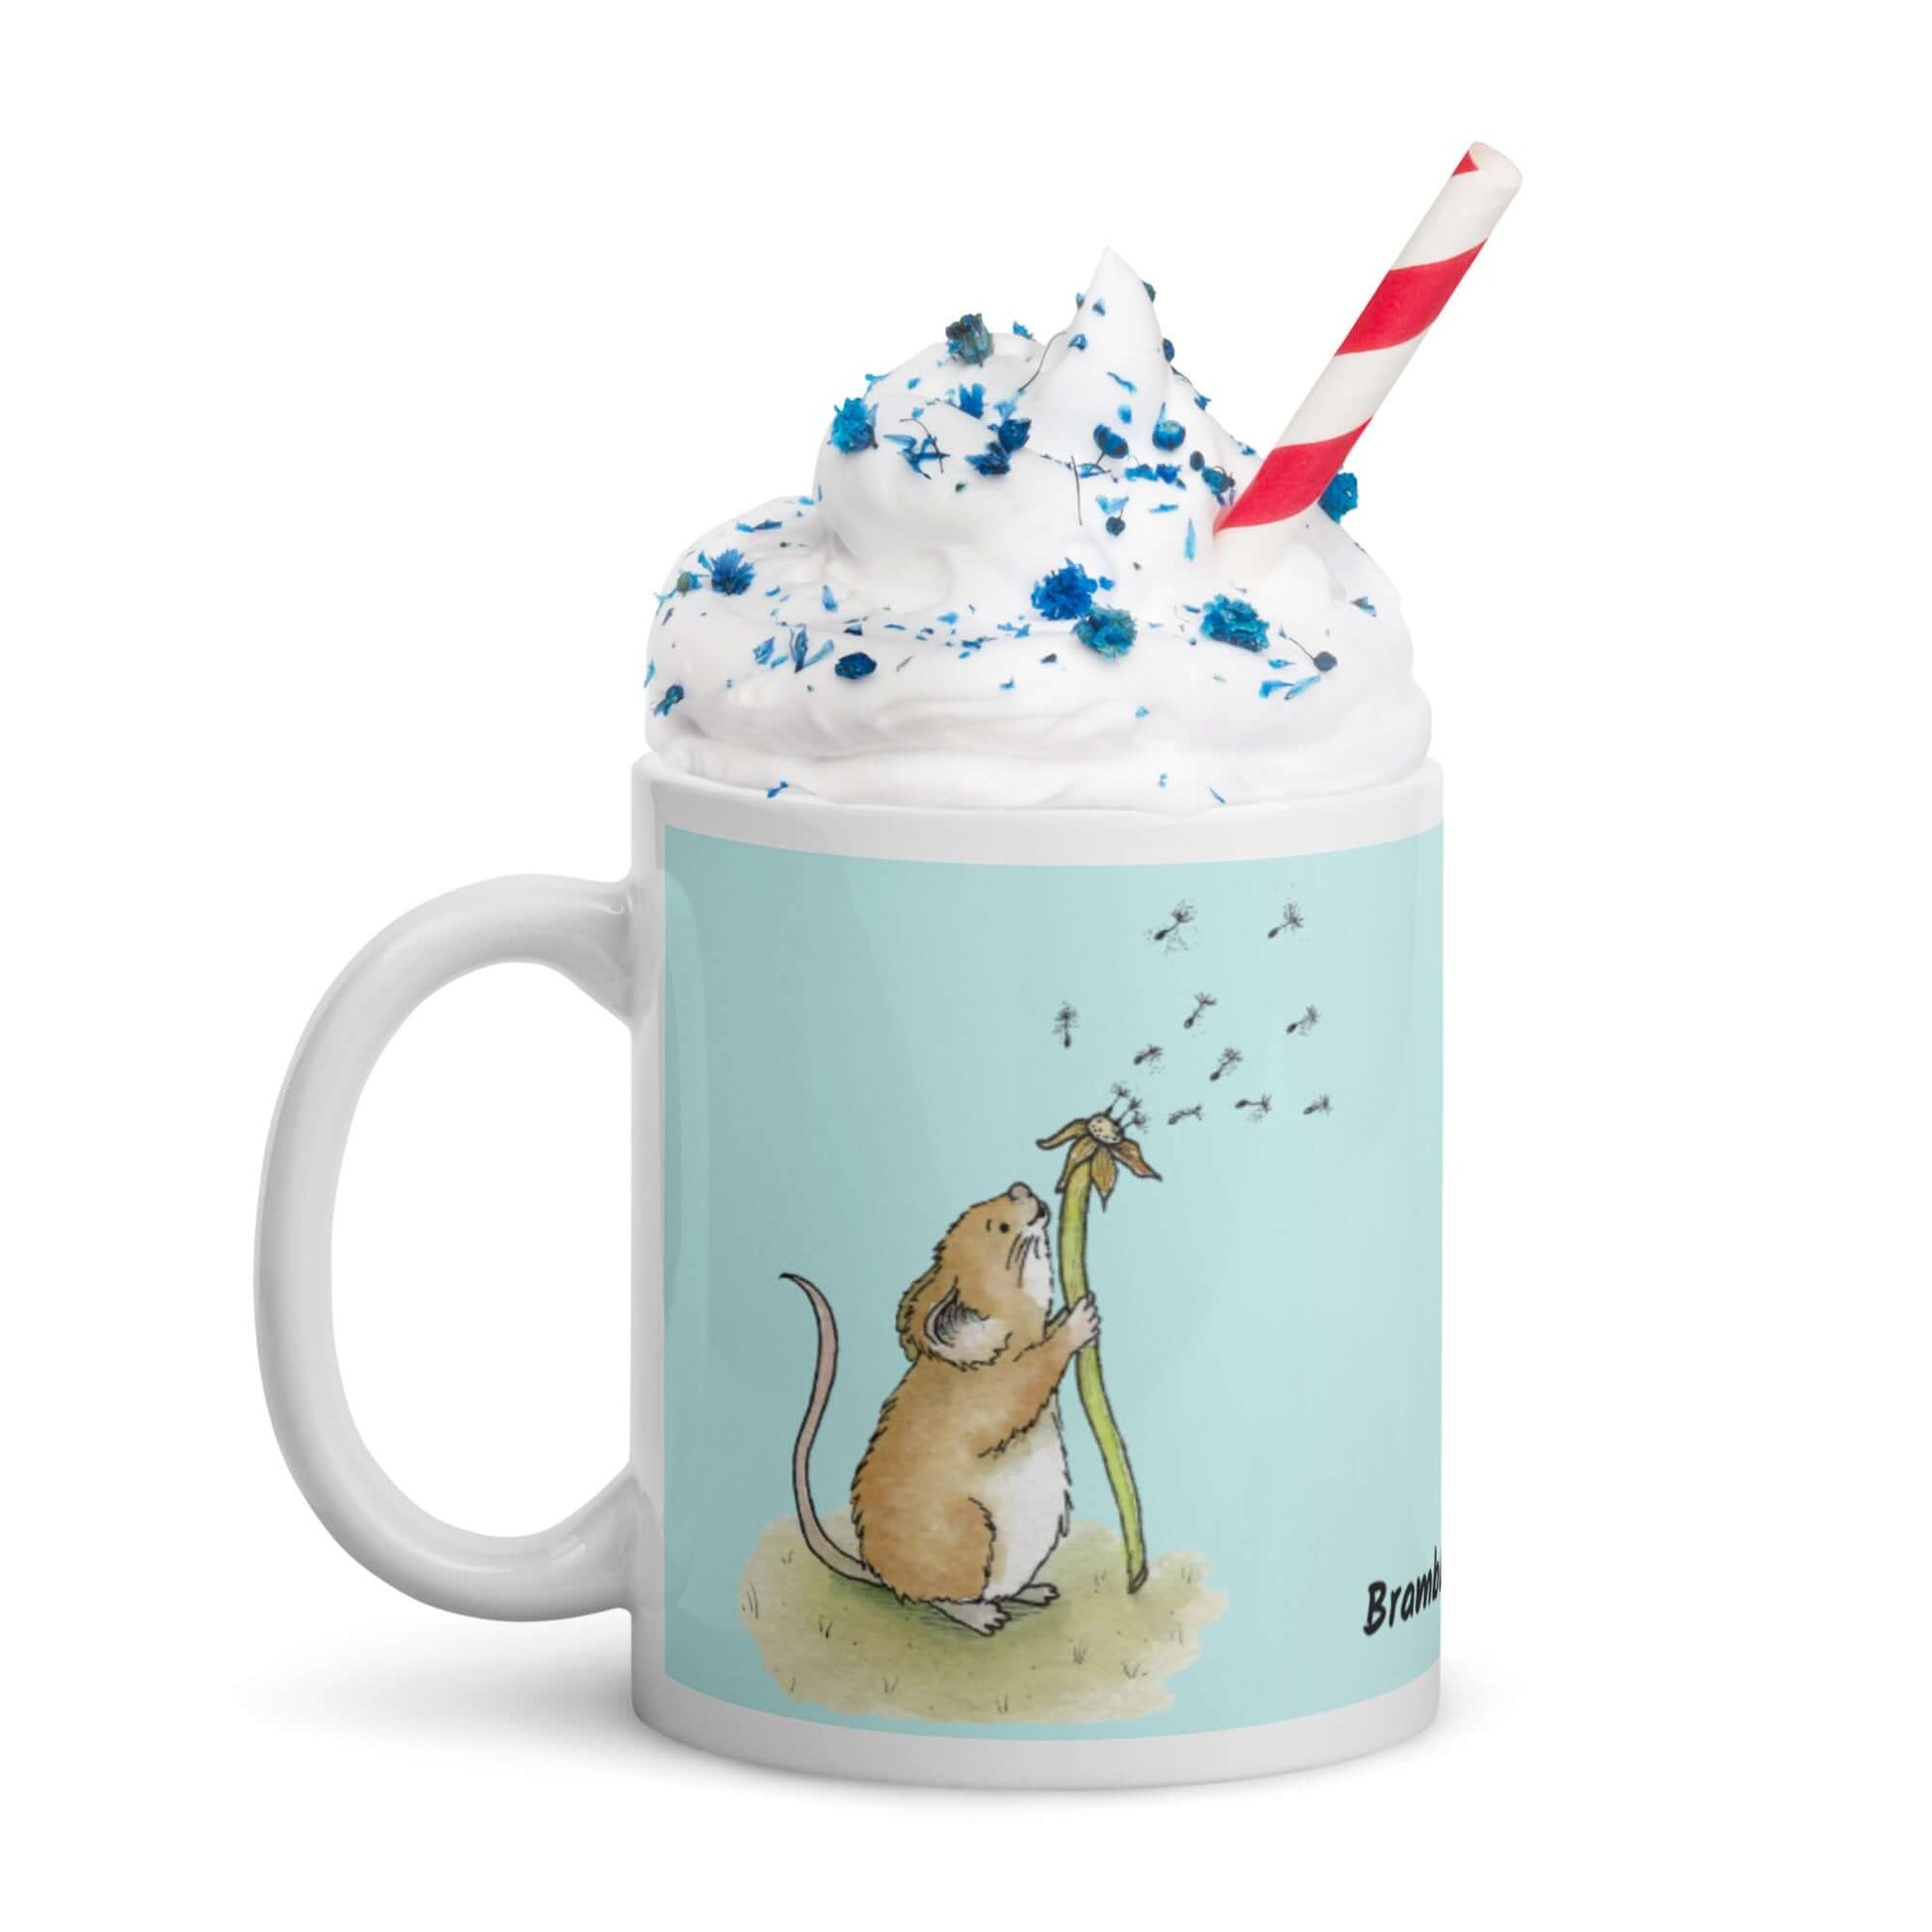 Two-sided image of original Dandelion wish design of cute watercolor mouse blowing dandelion seeds  featured on 11 ounce mug with light blue background